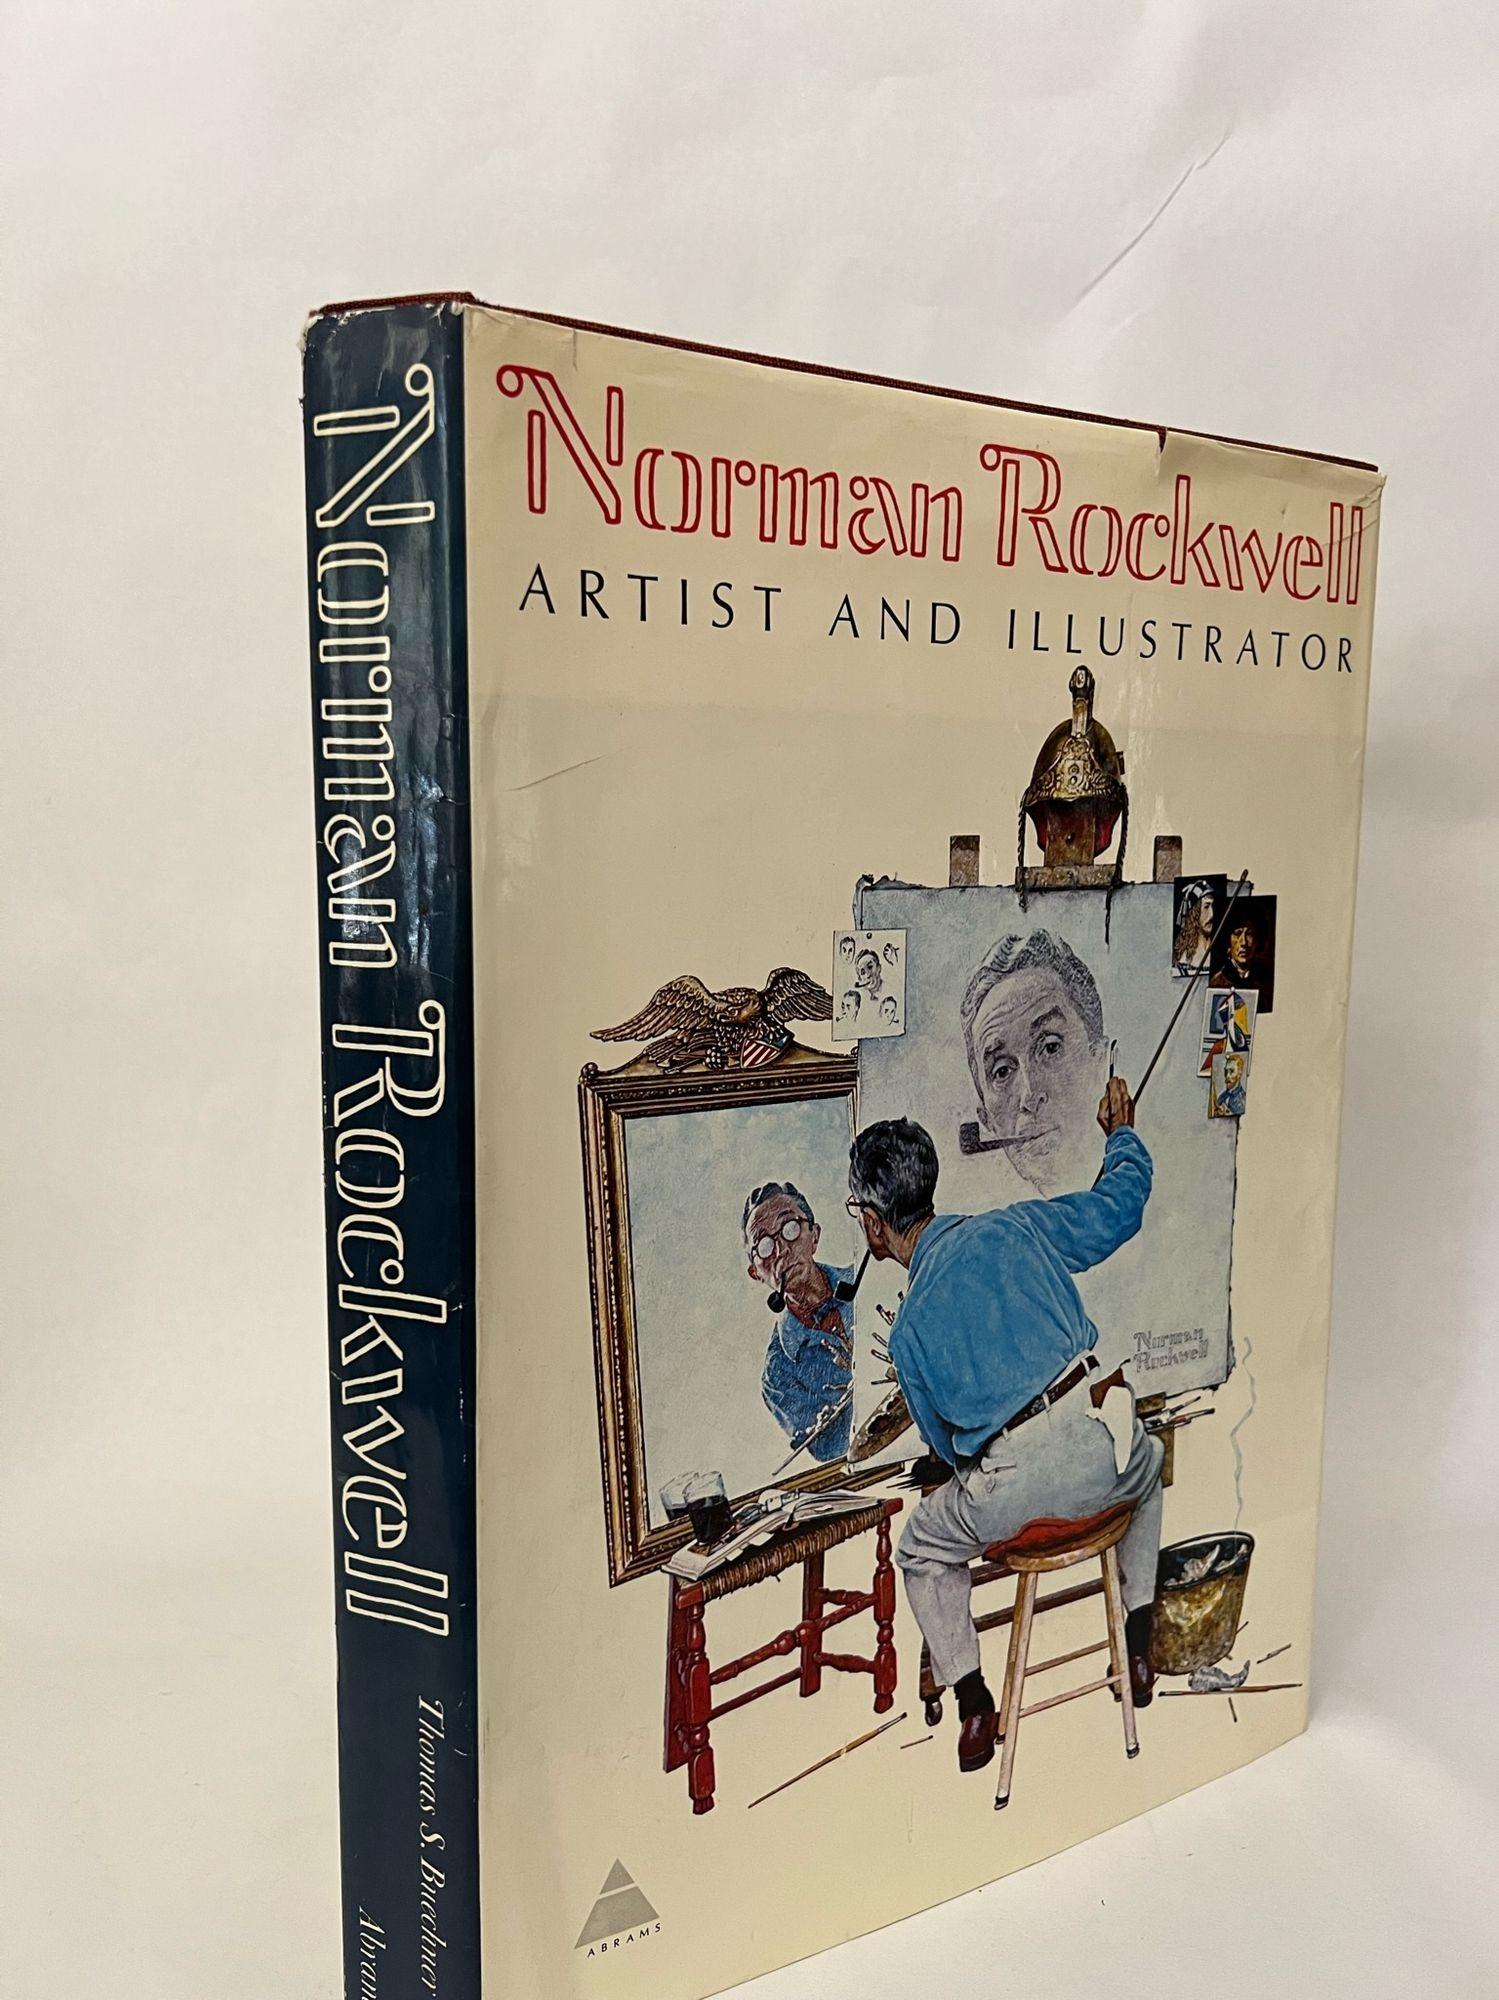 Norman Rockwell: Artist and Illustrator BY NORMAN ROCKWELL. Buechner, Thomas S.
Published by New York, Harry N. Abrahams, 1970.
Large heavy oversized hardcover coffee table book.
First edition. Includes 614 illustrations with 111 in full color, some